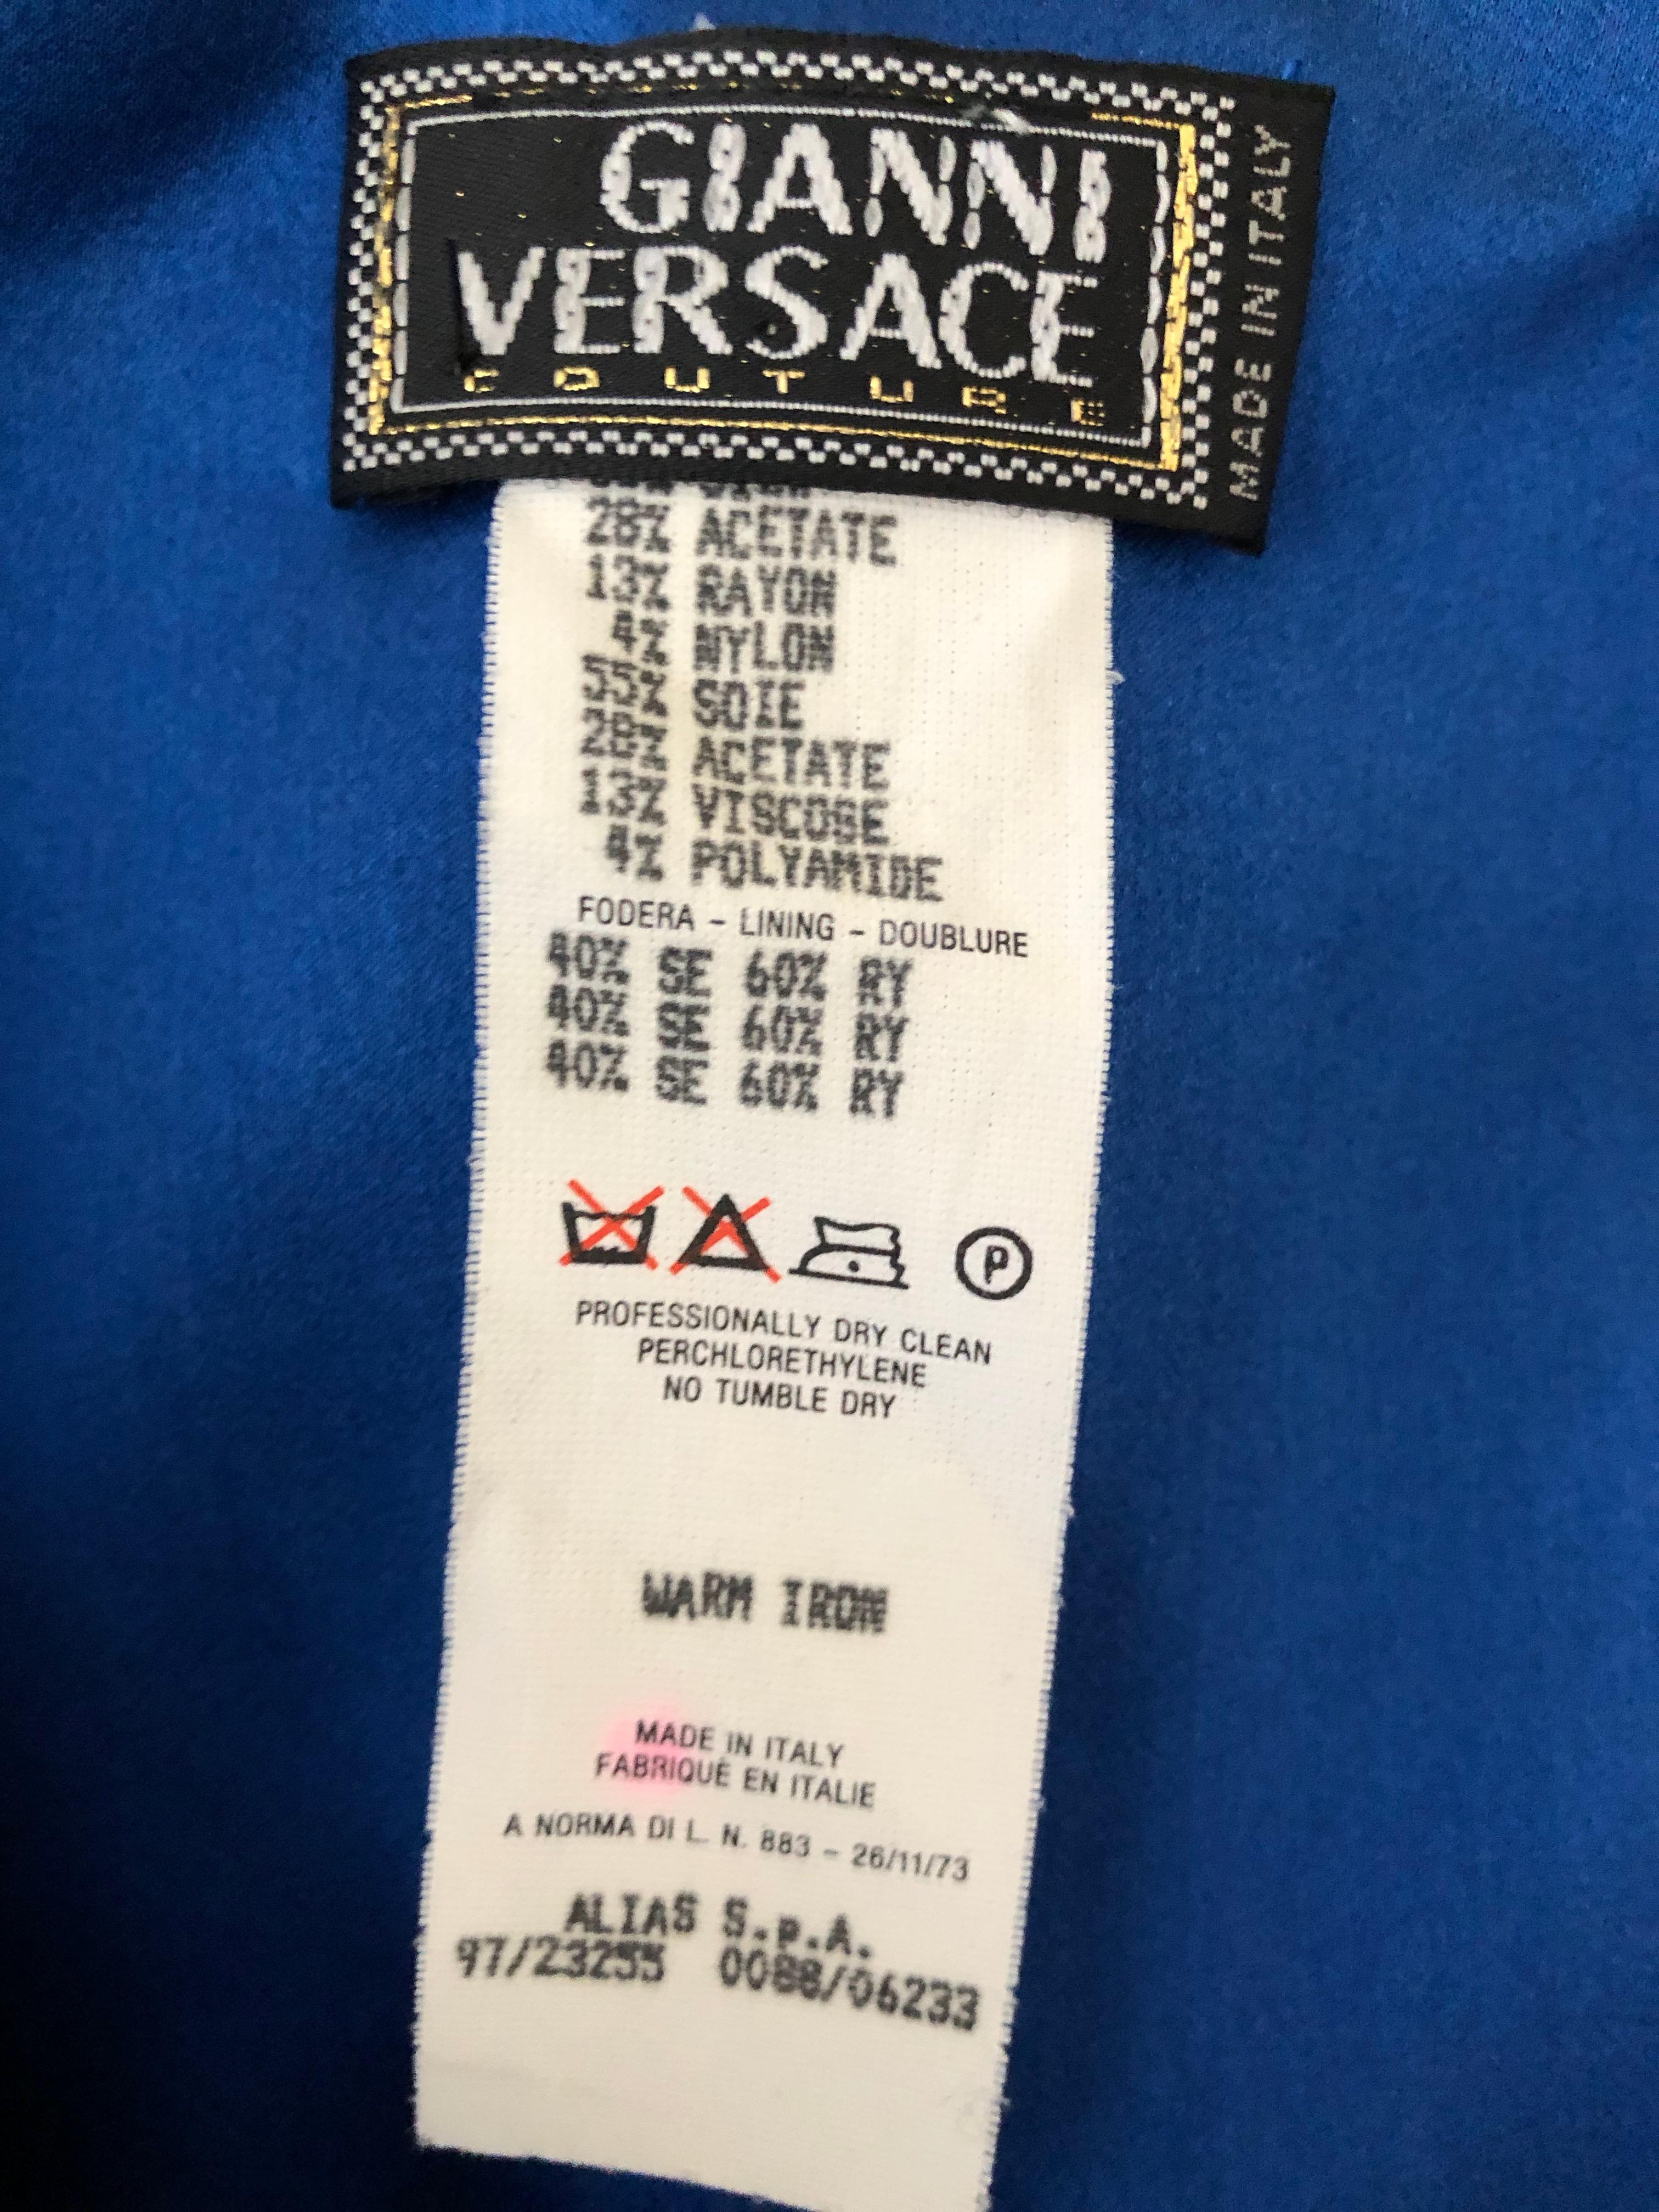 Gianni Versace Couture Vintage 80's Metallic Blue Evening Dress with Bugle Bead Details.
It's hard to describe the fabric, but it is much more brilliant in person, it shimmers.
Detailed with blue bugle beads, there are some beads missing on the